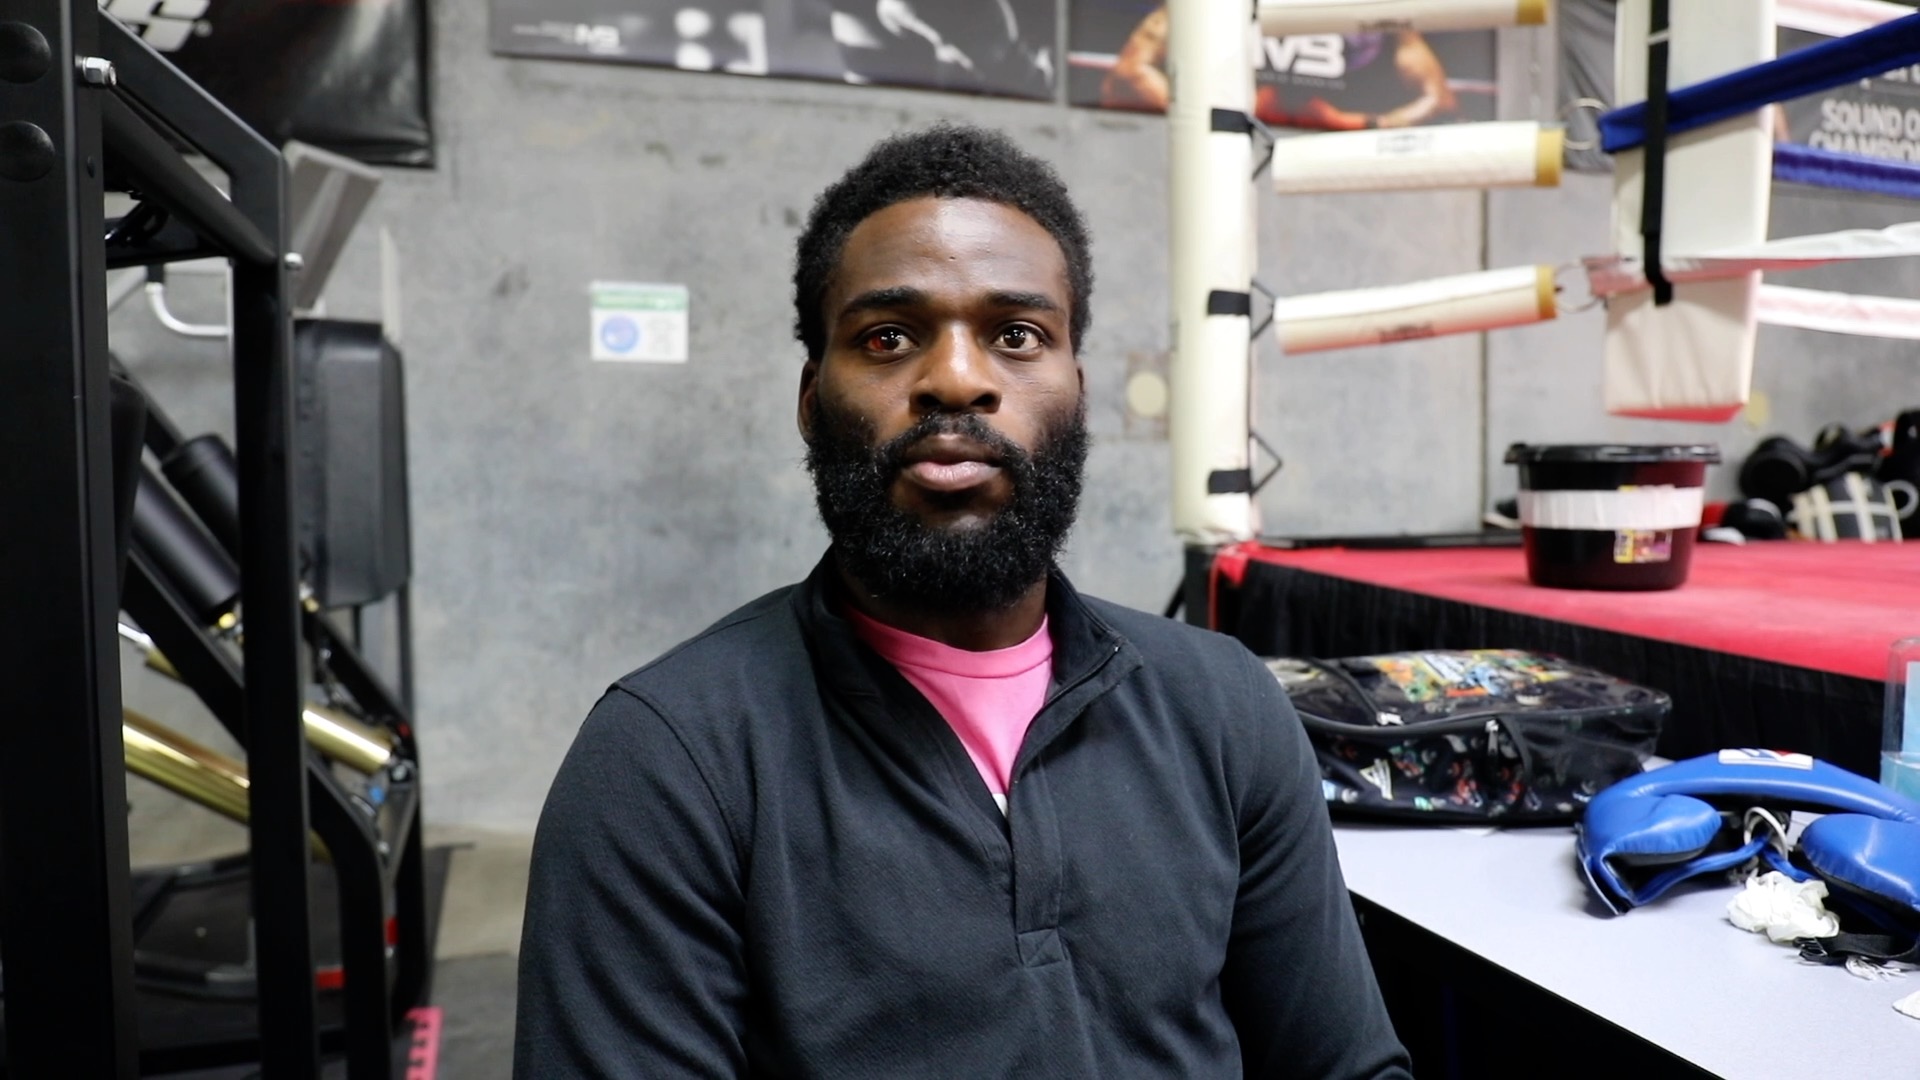 Joshua Buatsi talks about fighting on Sky Sports and Boxxer for the first time as well as future fights in 2023